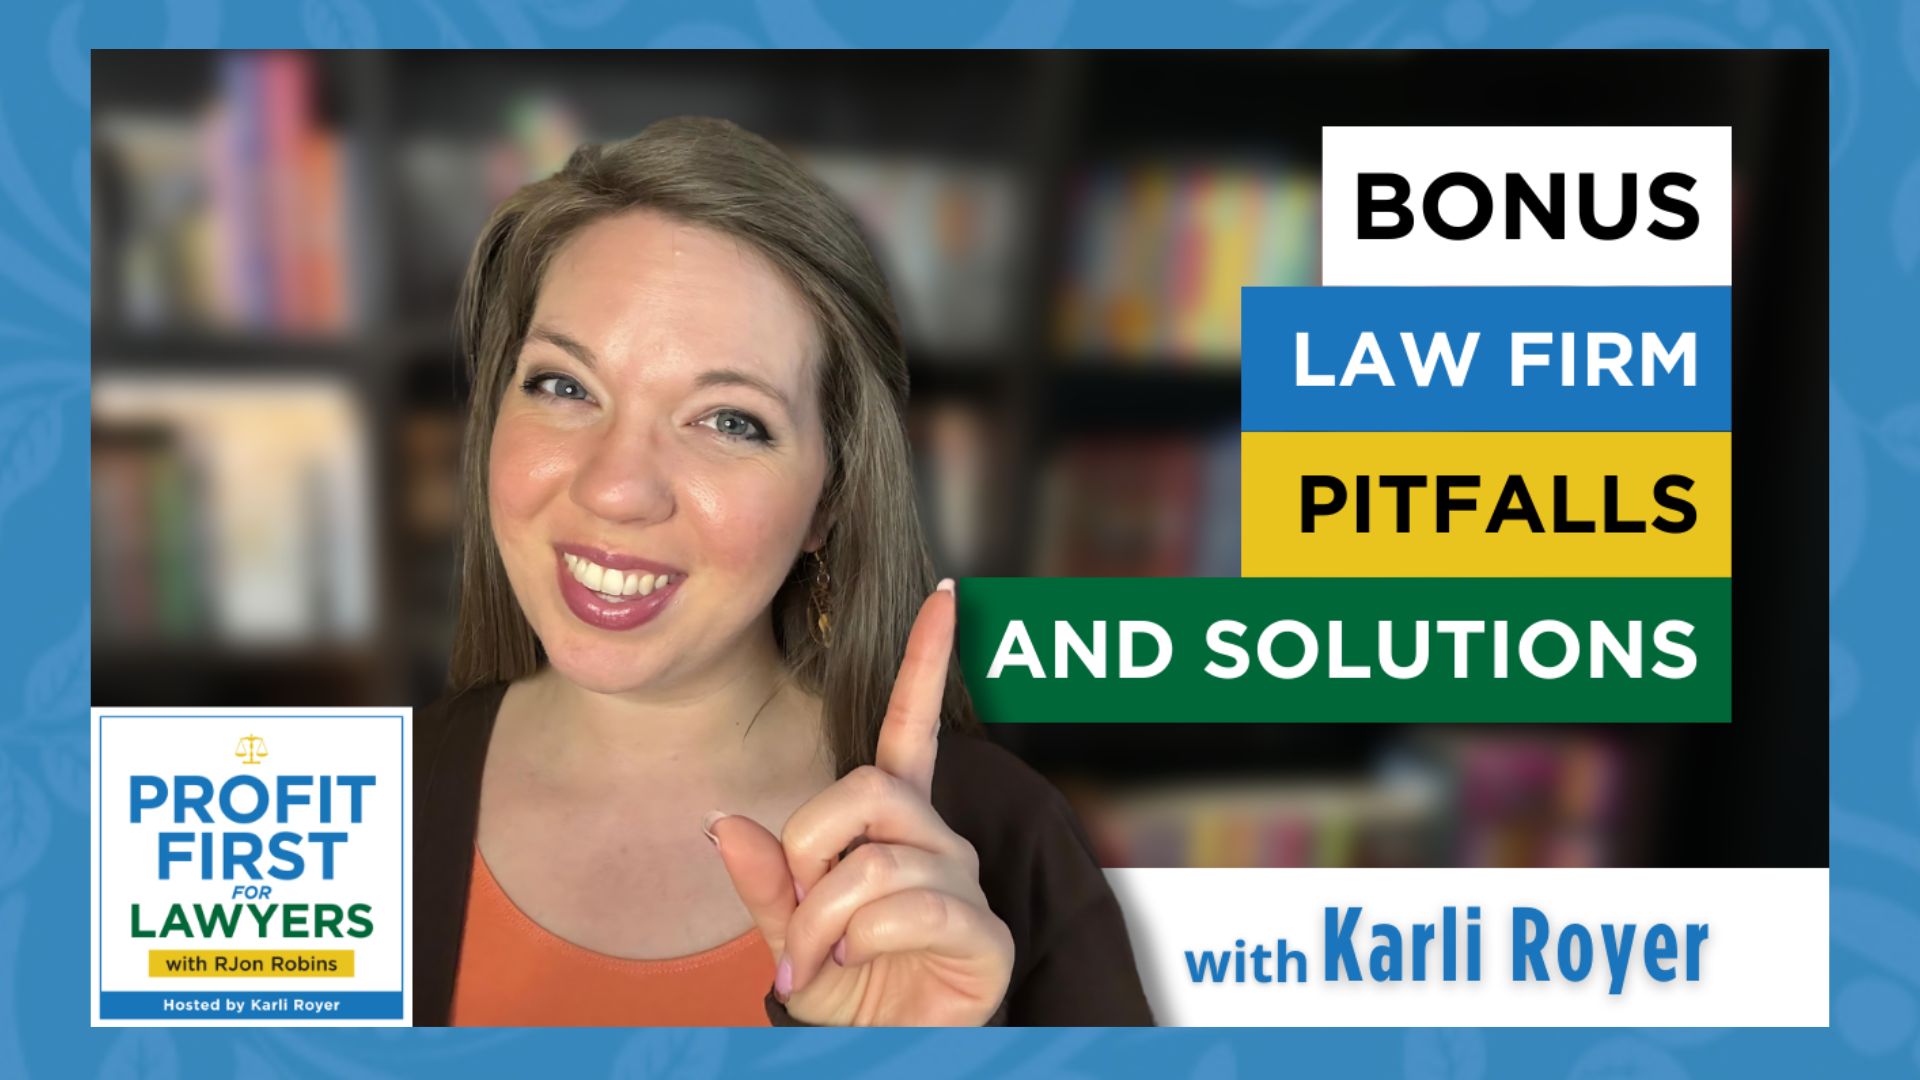 featured image of Karli Royer smiling and pointing towards the title of the episode: BONUS Law Firm Pitfalls and Solutions